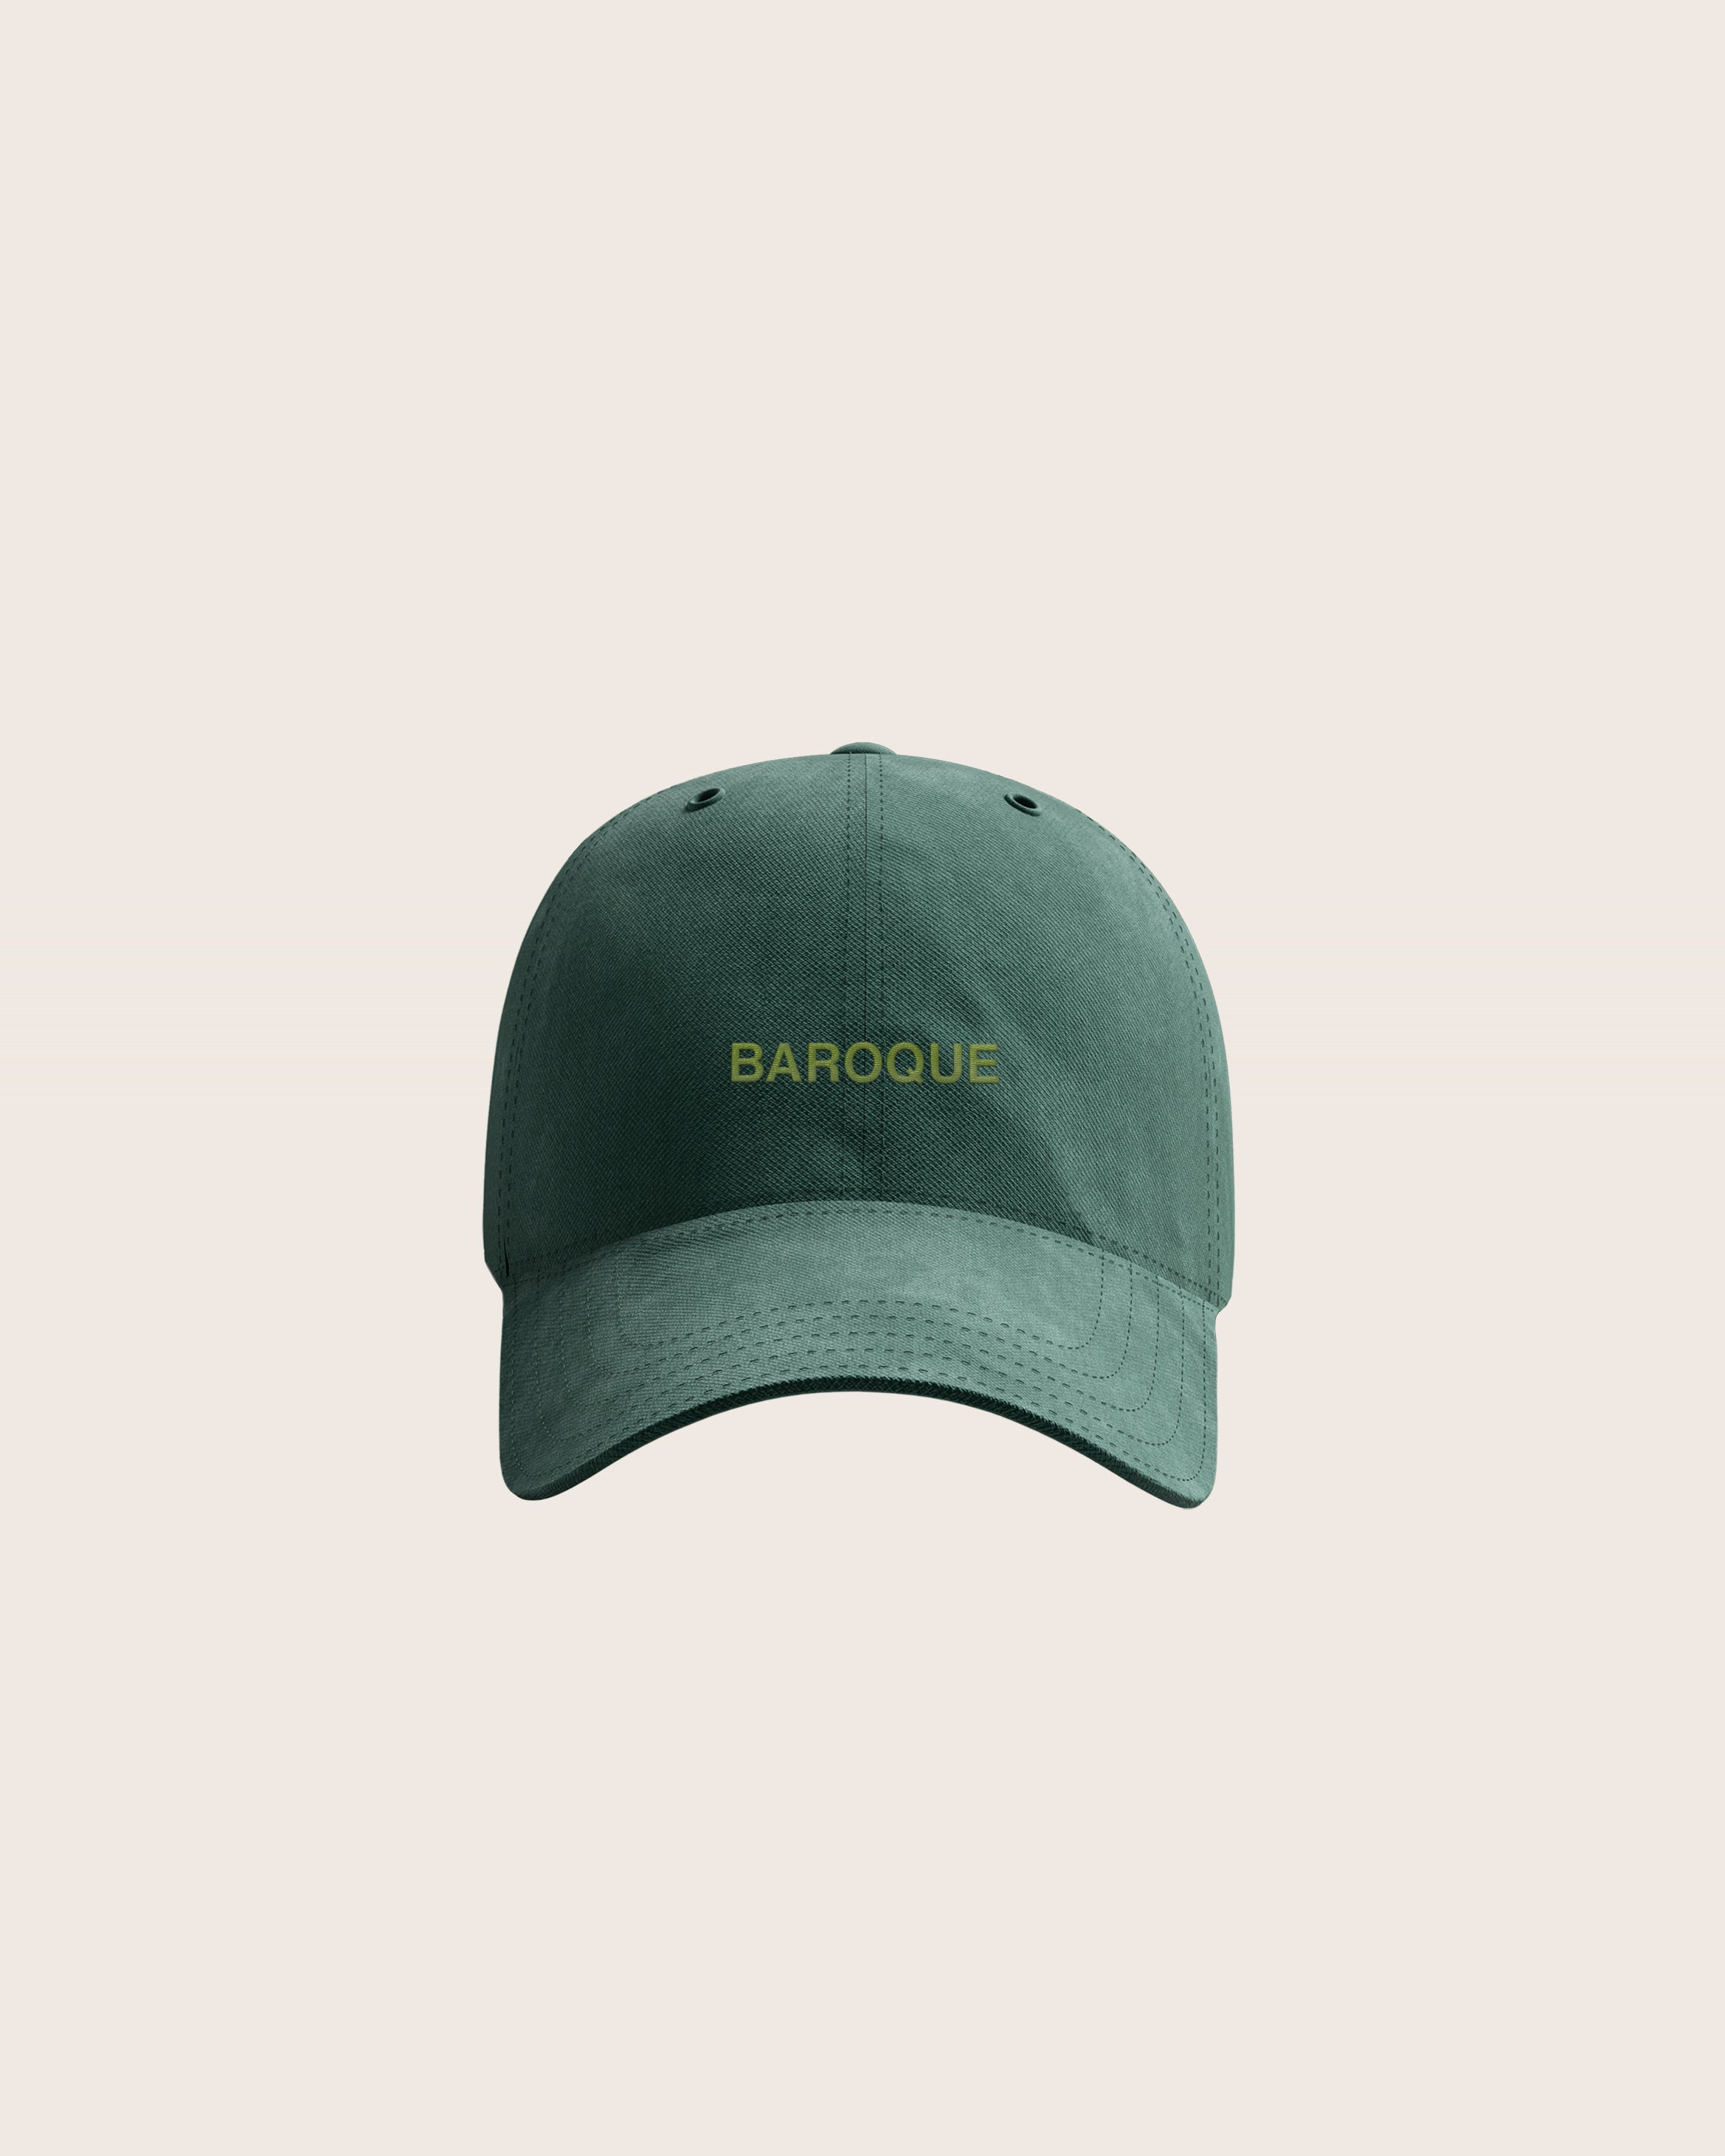 Green Baseball Cap / Dad Hat with Baroque Art Movement Text Embroidery on Front. 100% Cotton.